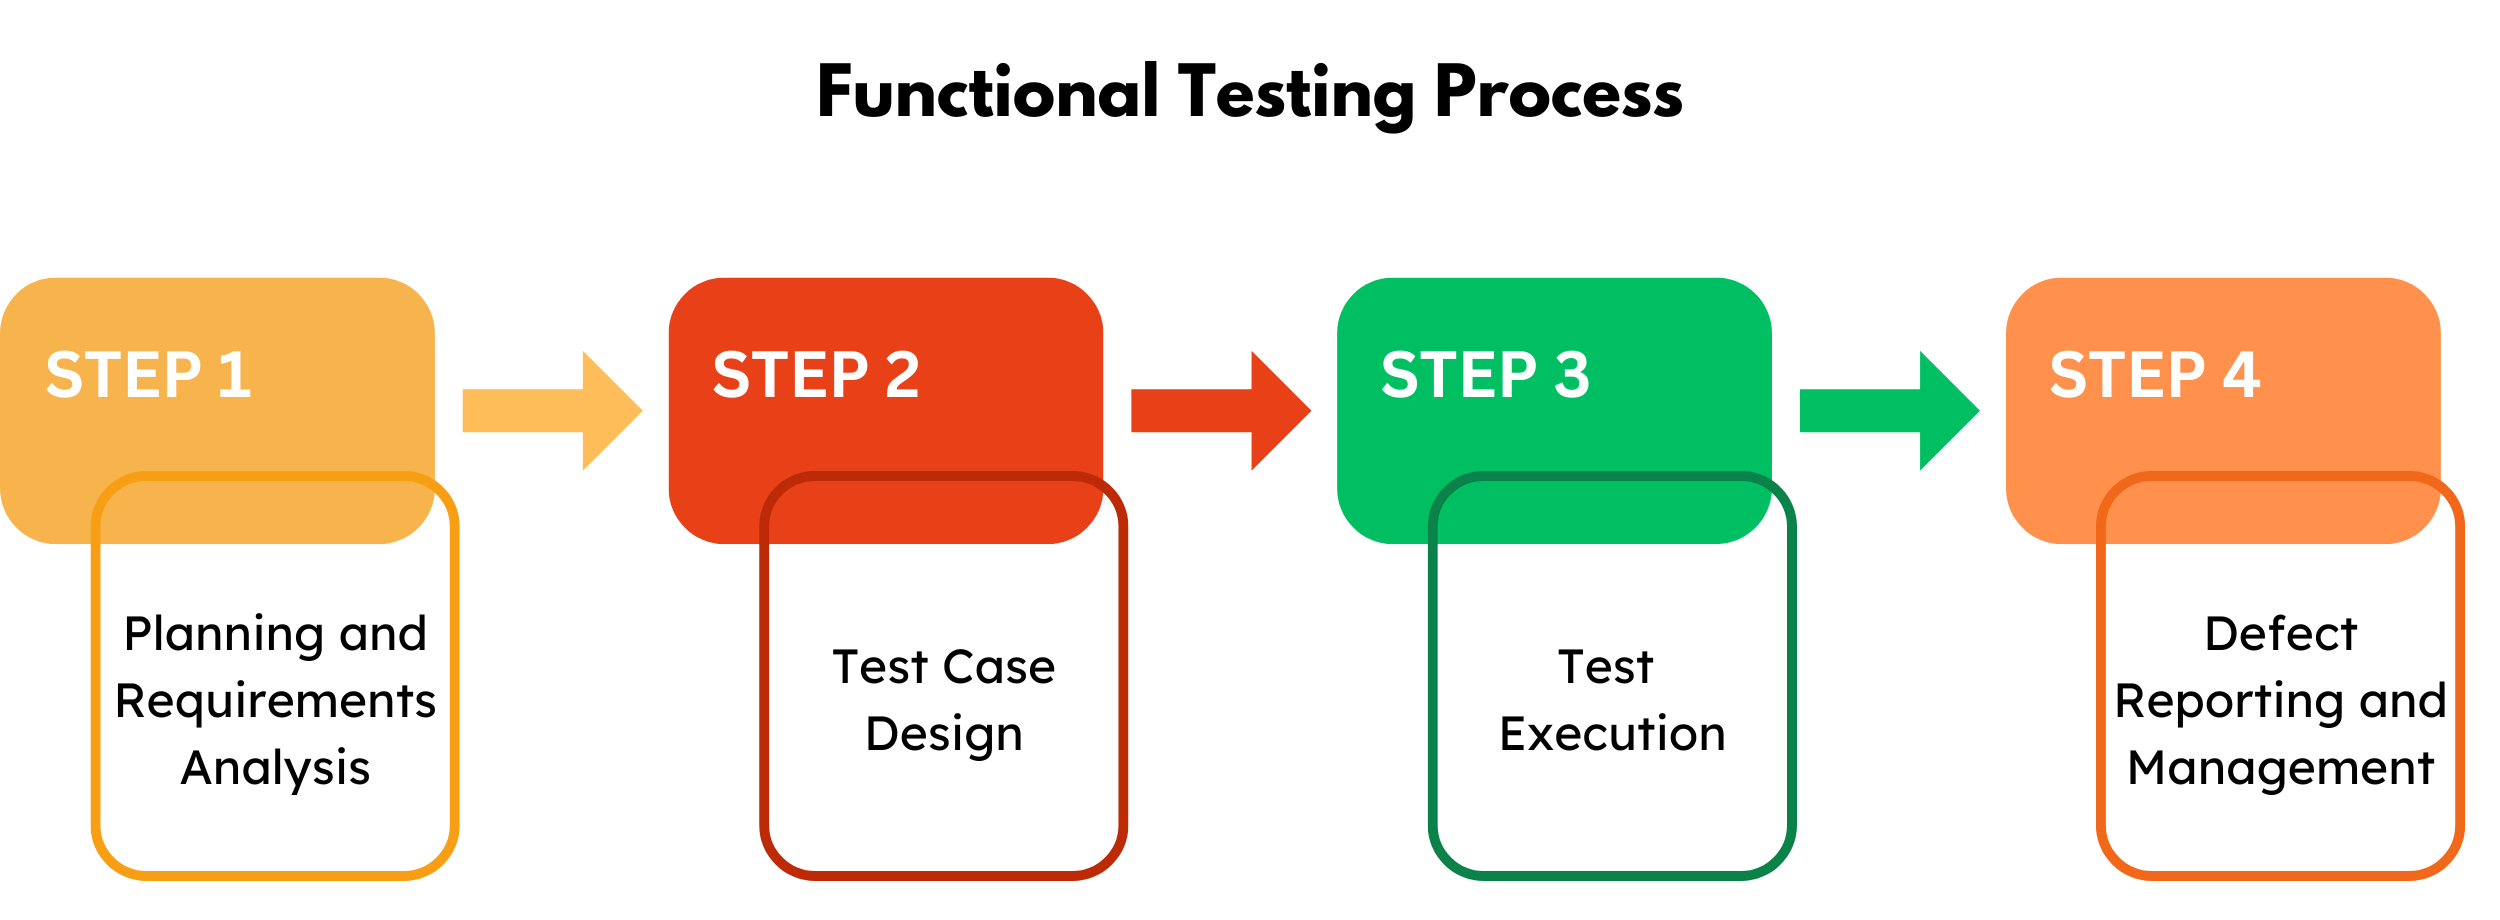 4 Steps to Implement Functional Testing